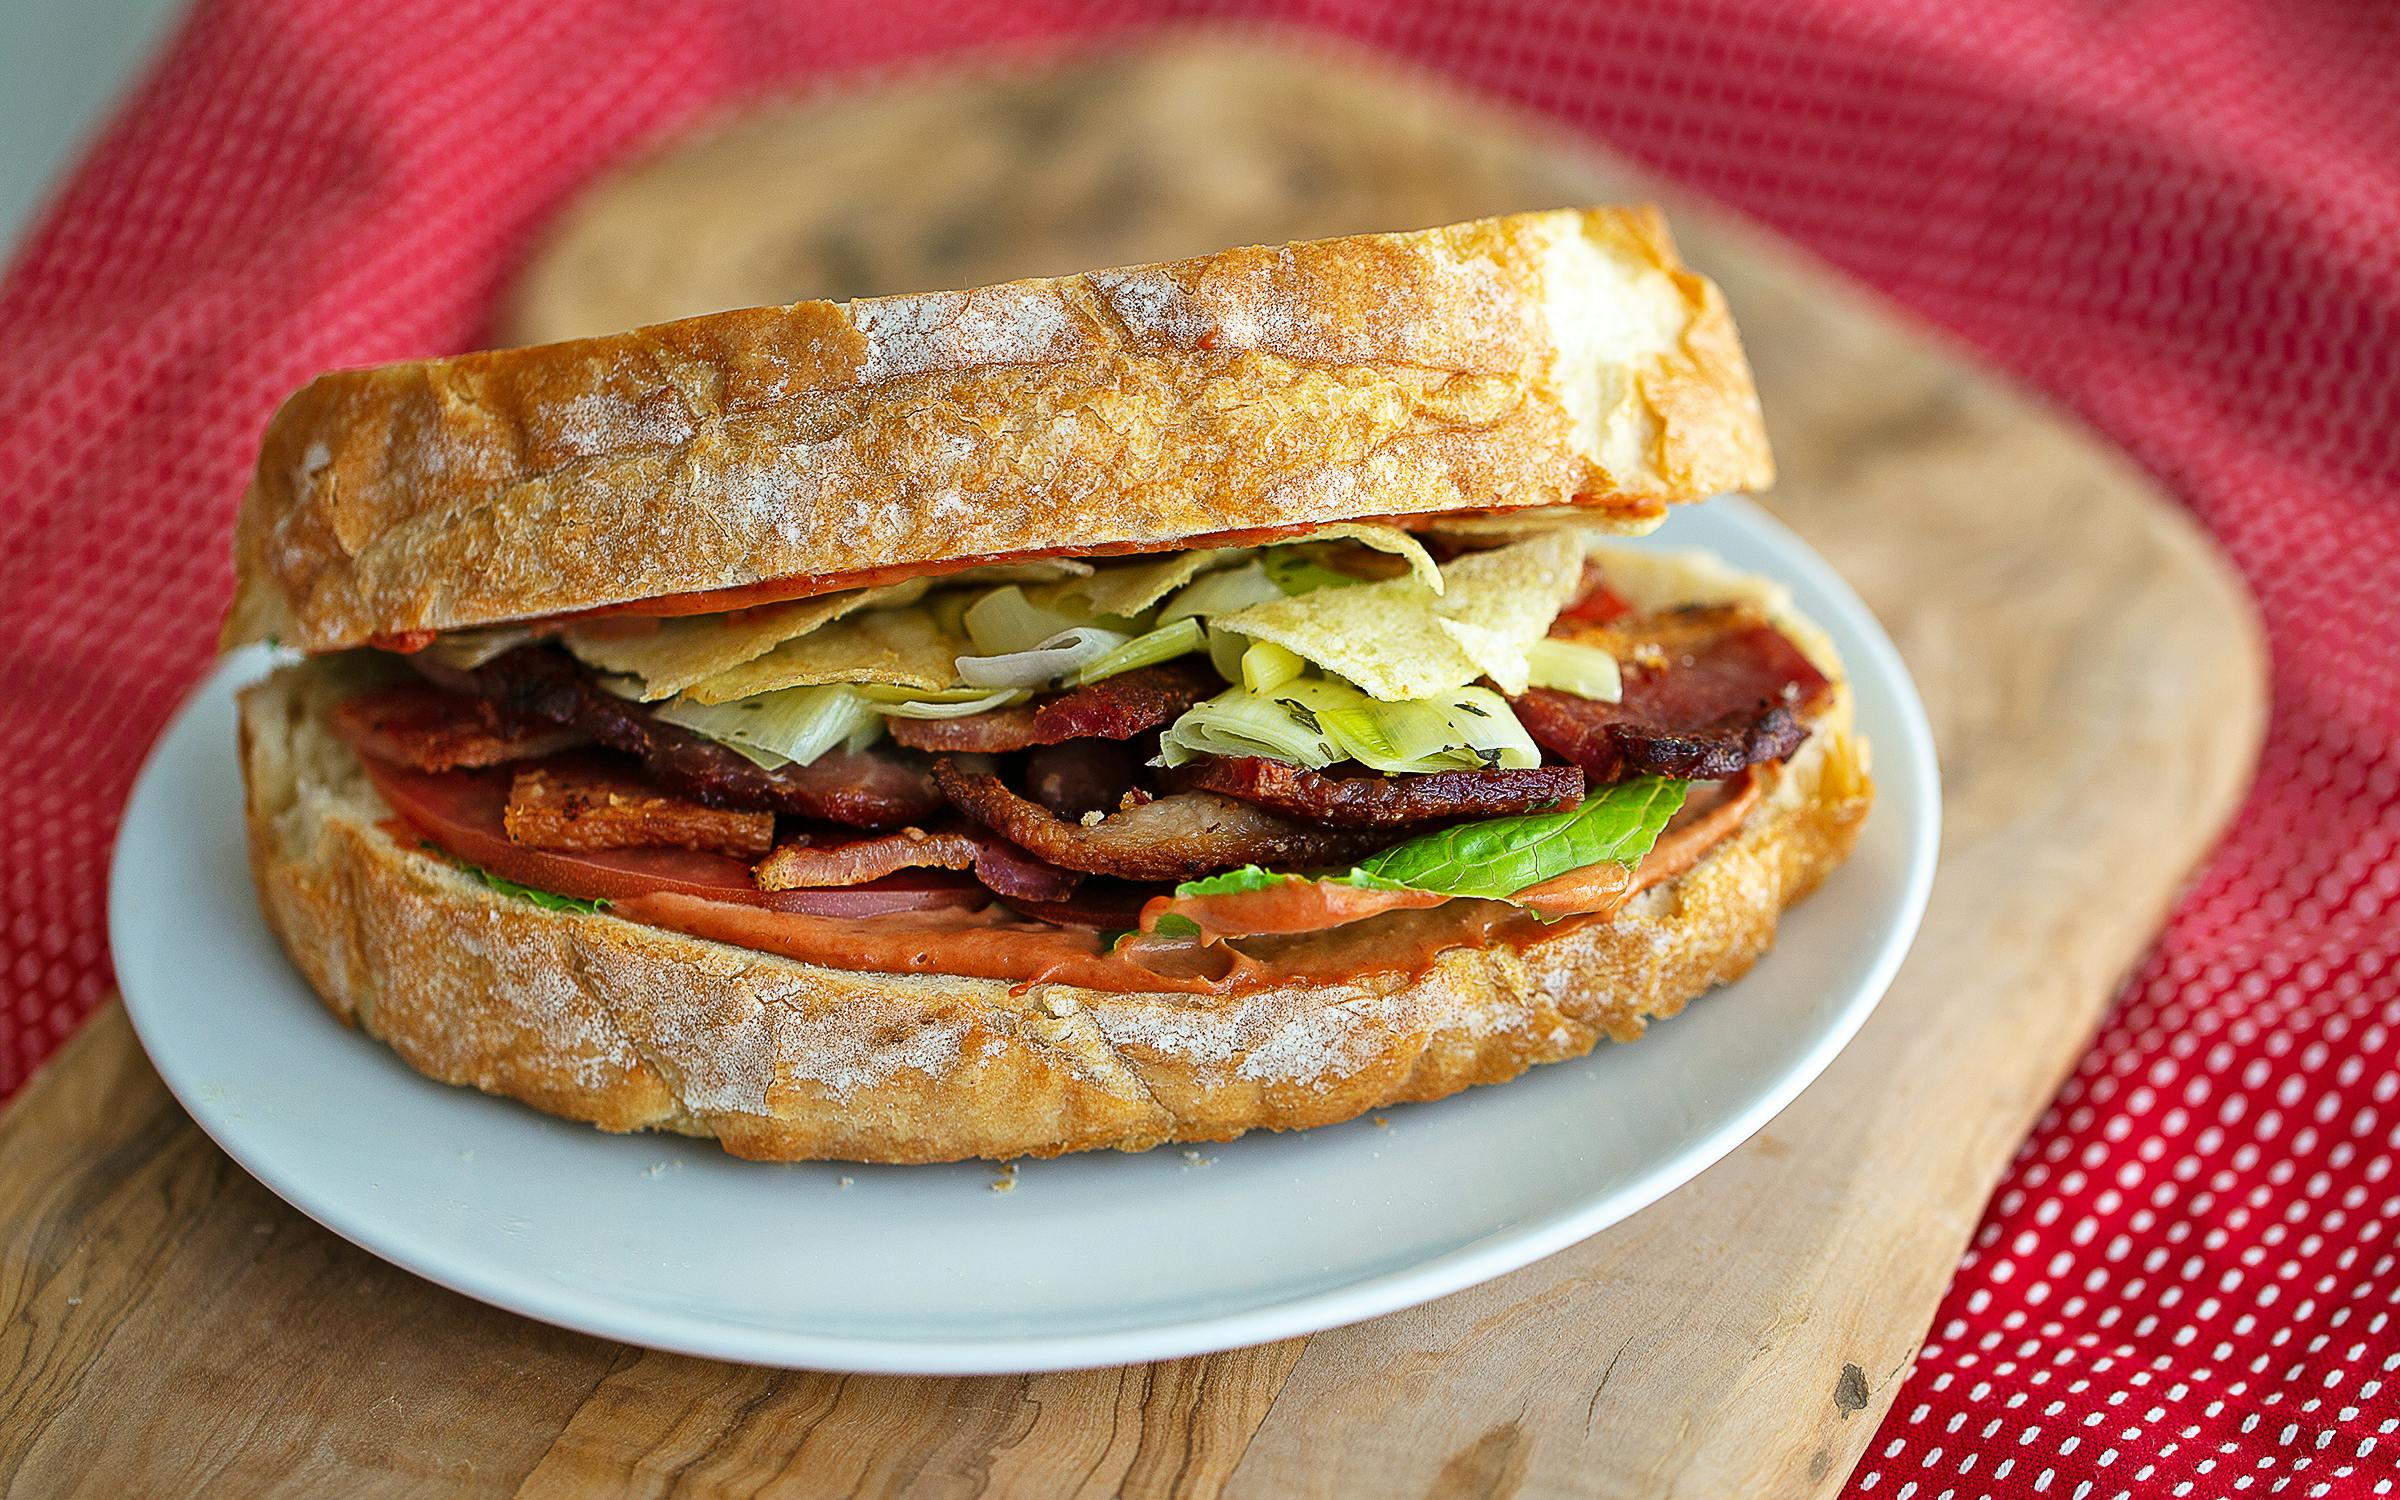 https://img.texasmonthly.com/2021/01/texas-sandwich-recipe-squable.jpg?auto=compress&crop=faces&fit=fit&fm=pjpg&ixlib=php-3.3.1&q=45